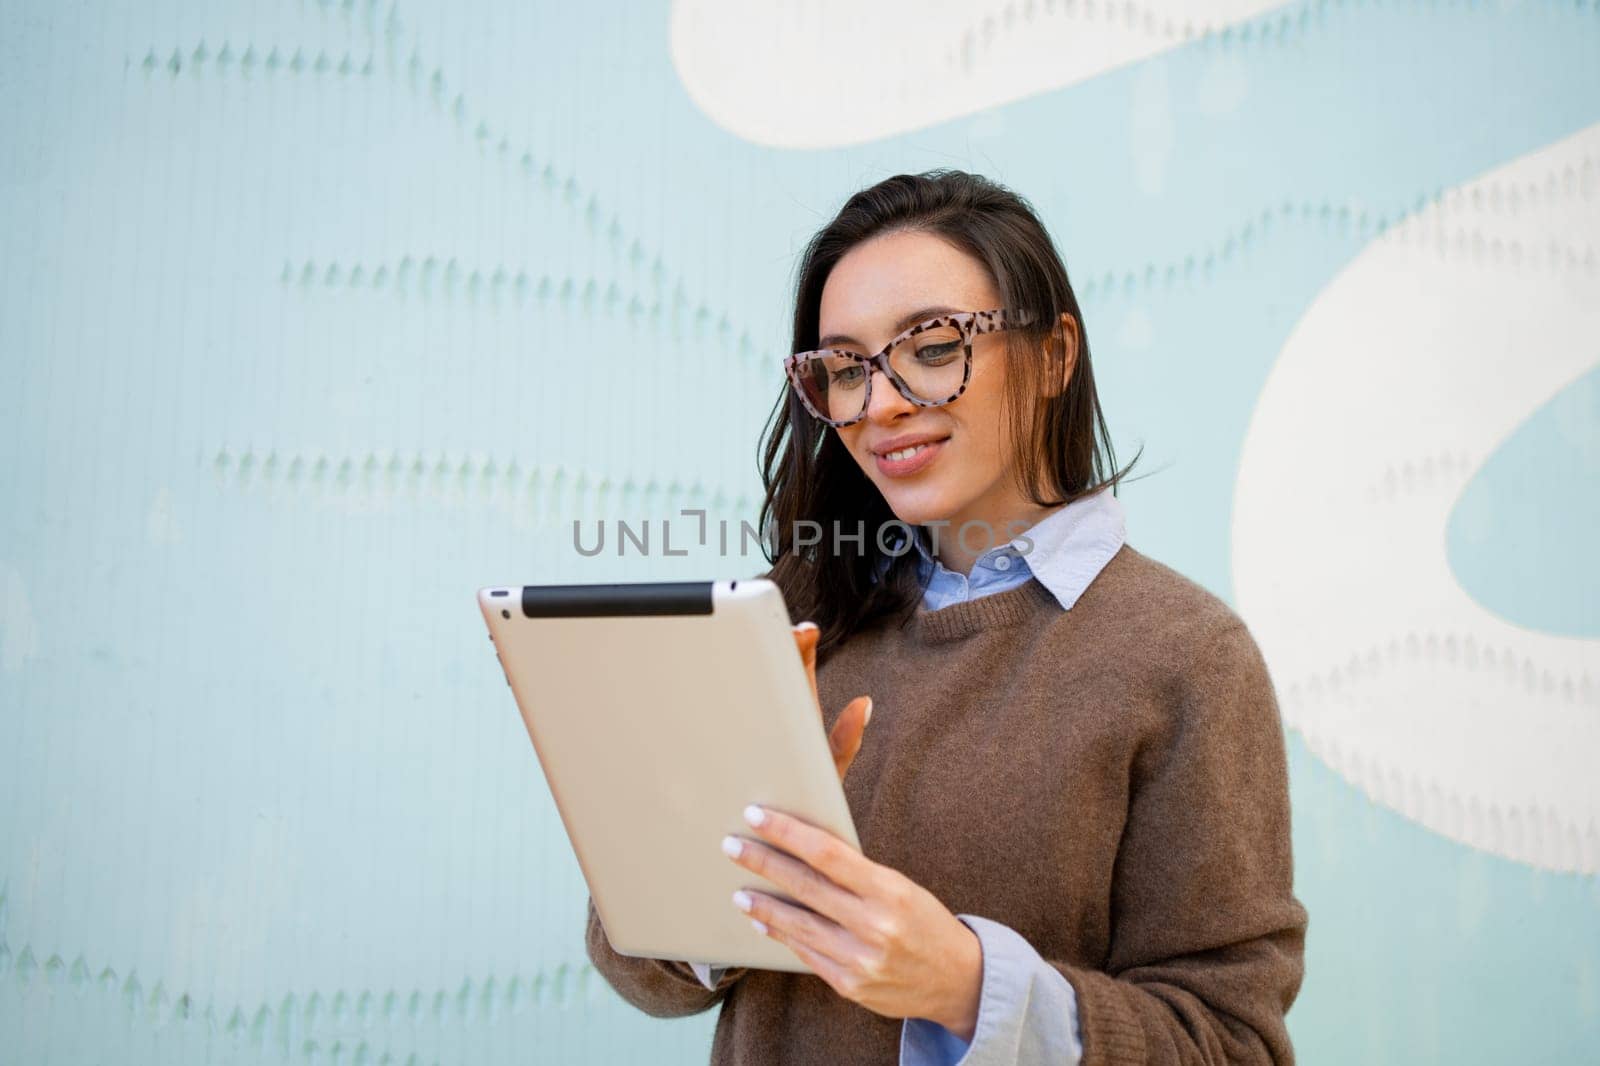 Formally dressed woman smiling glasses and marks tasks on tablet. Woman at work looking in tablet is dressed in formal wear and glasses. Young adult woman smiles and remotely sends report